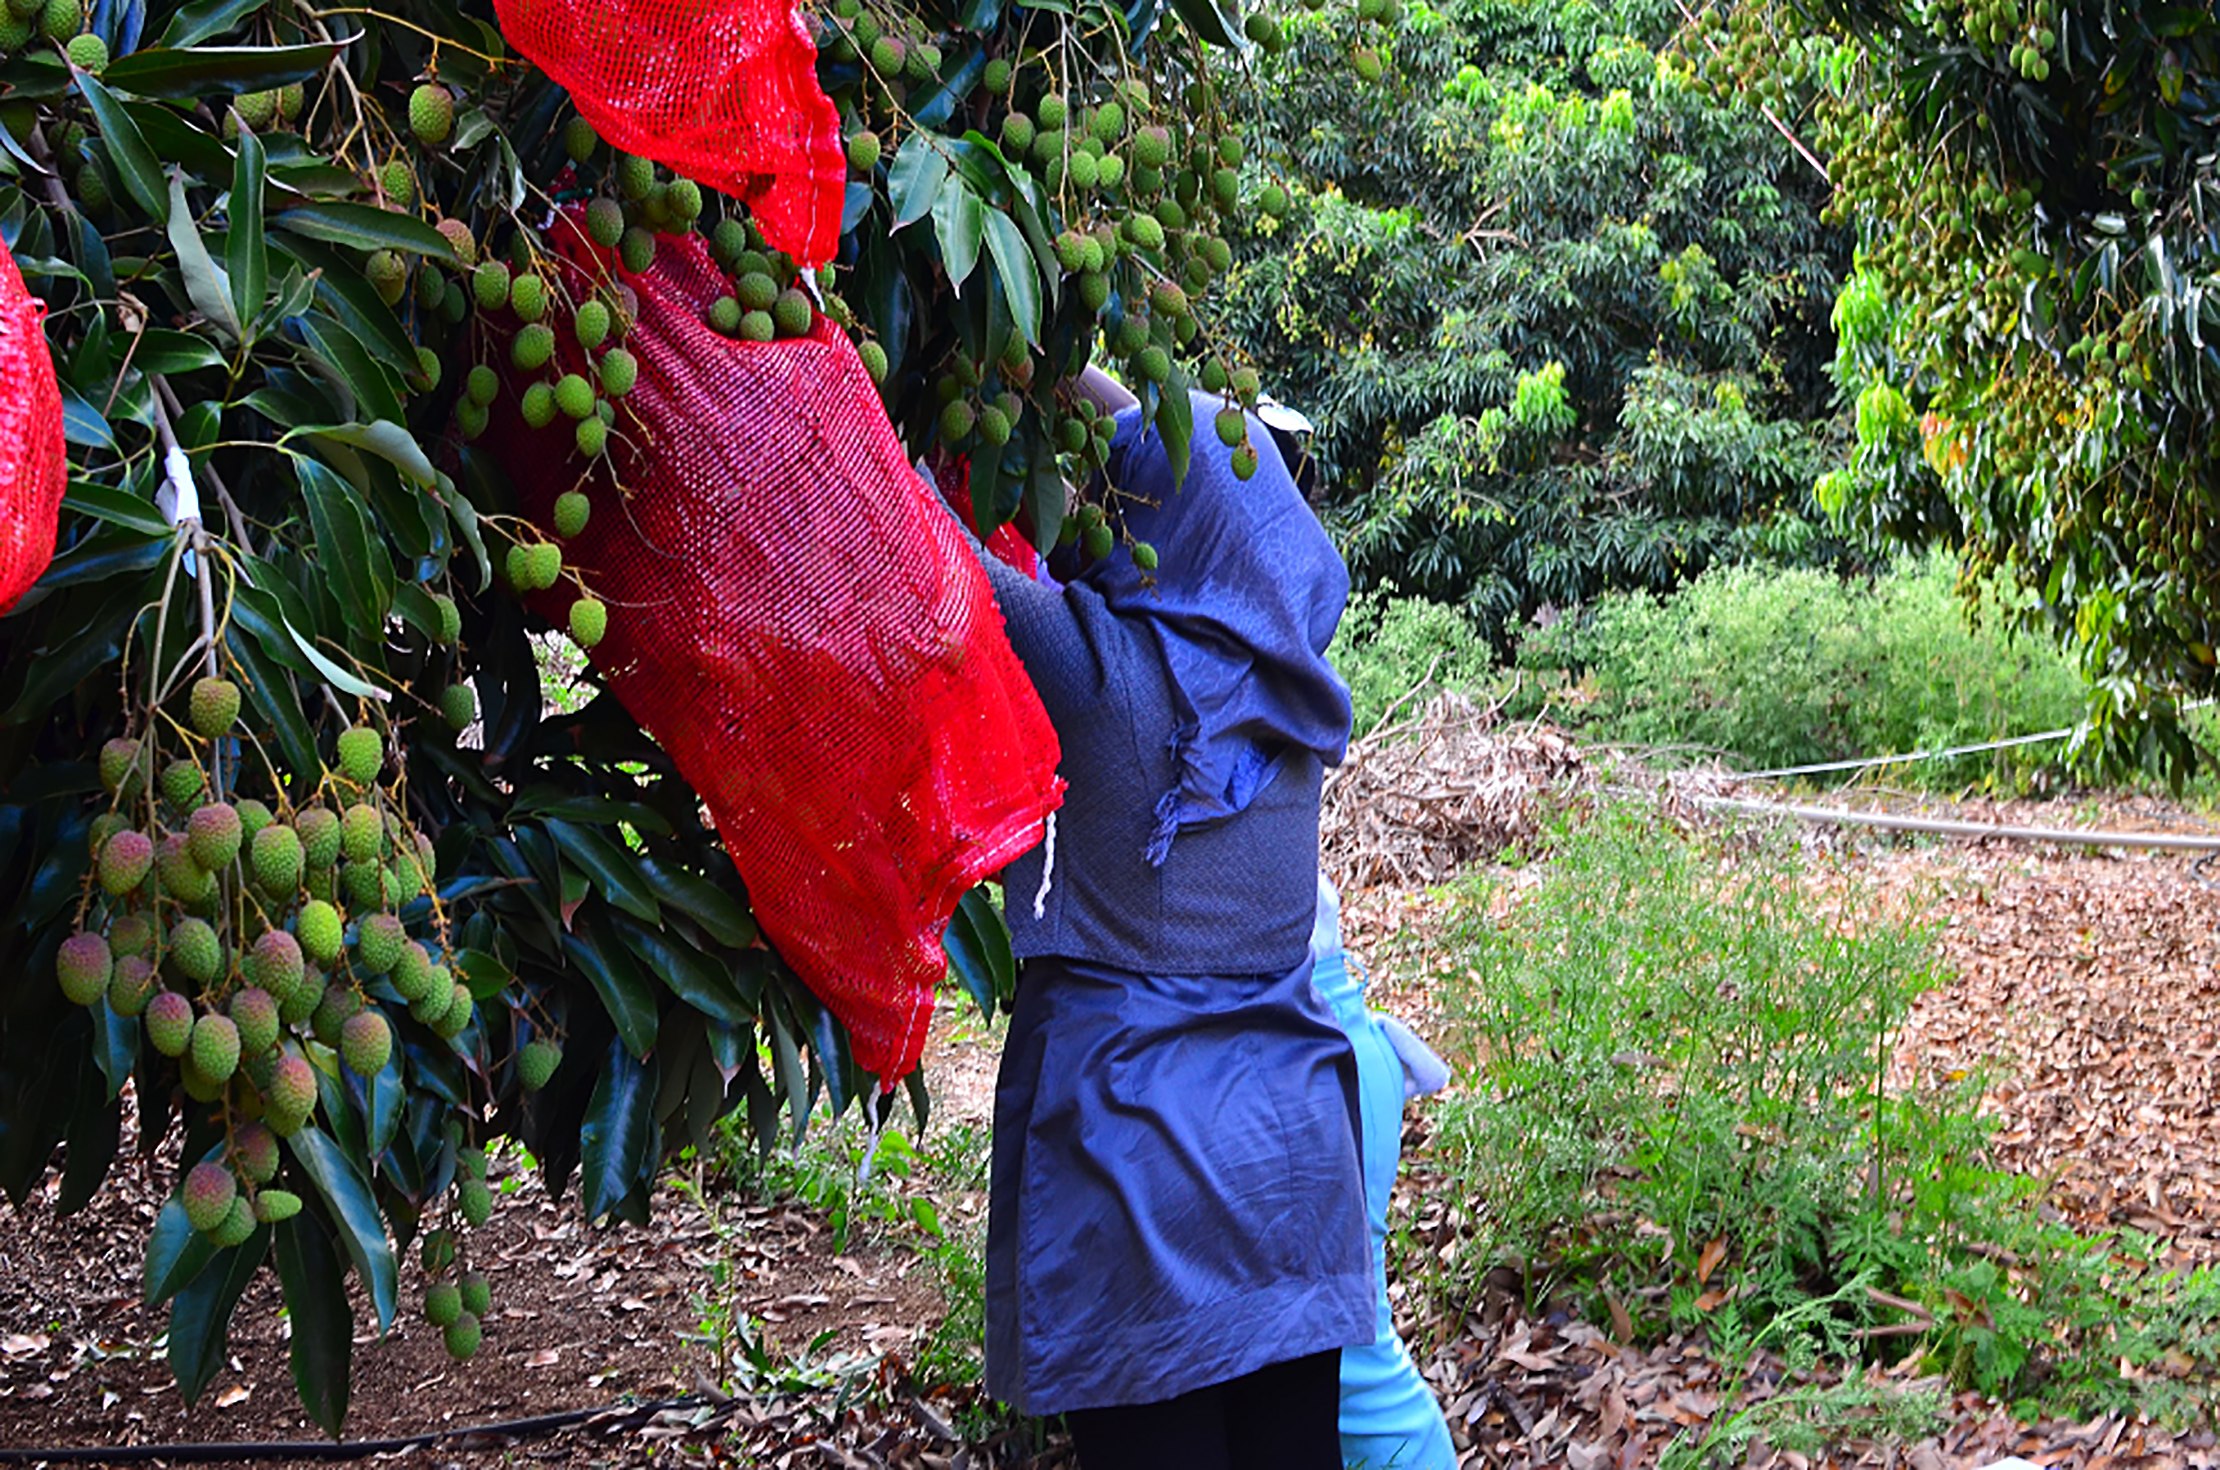 Nylon netted bags are used to protect lychee panicles from damage by the flying fox (Pteropus niger) in Mauritius